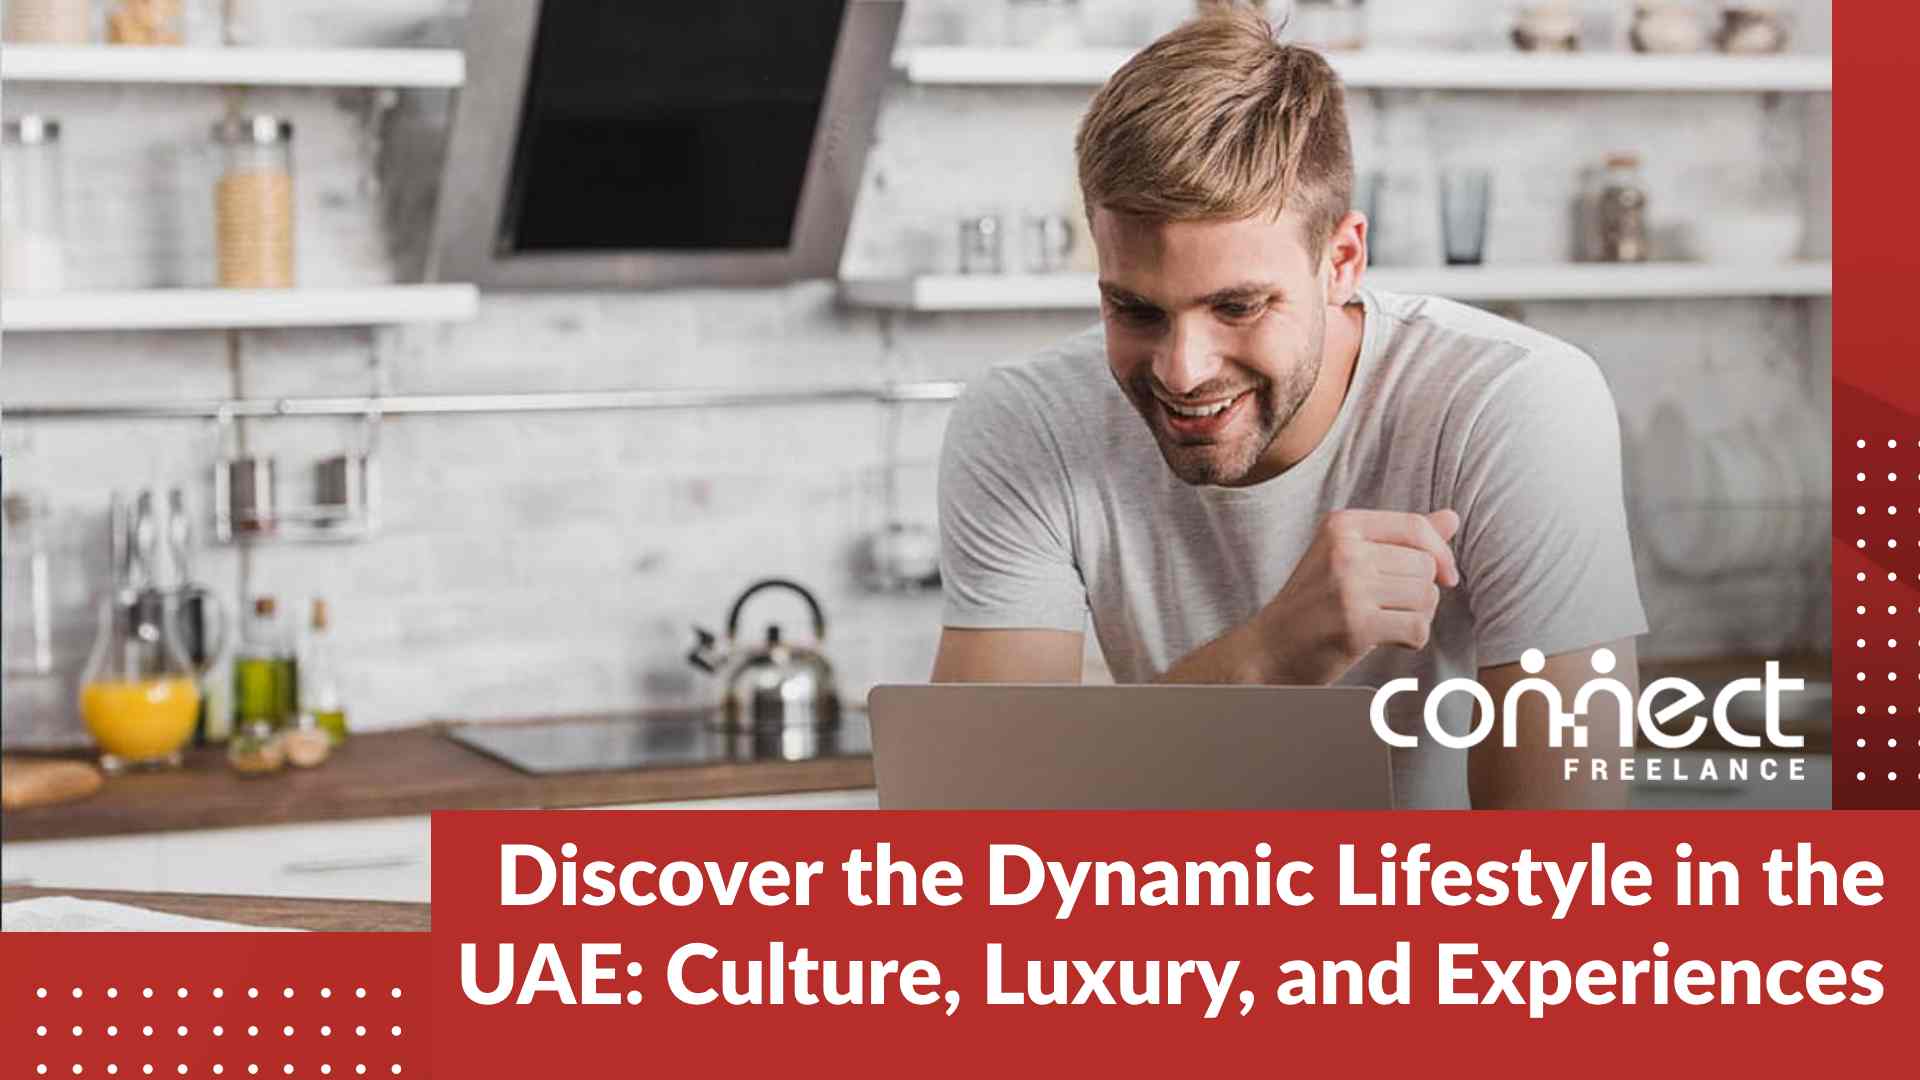 Lifestyle in the UAE